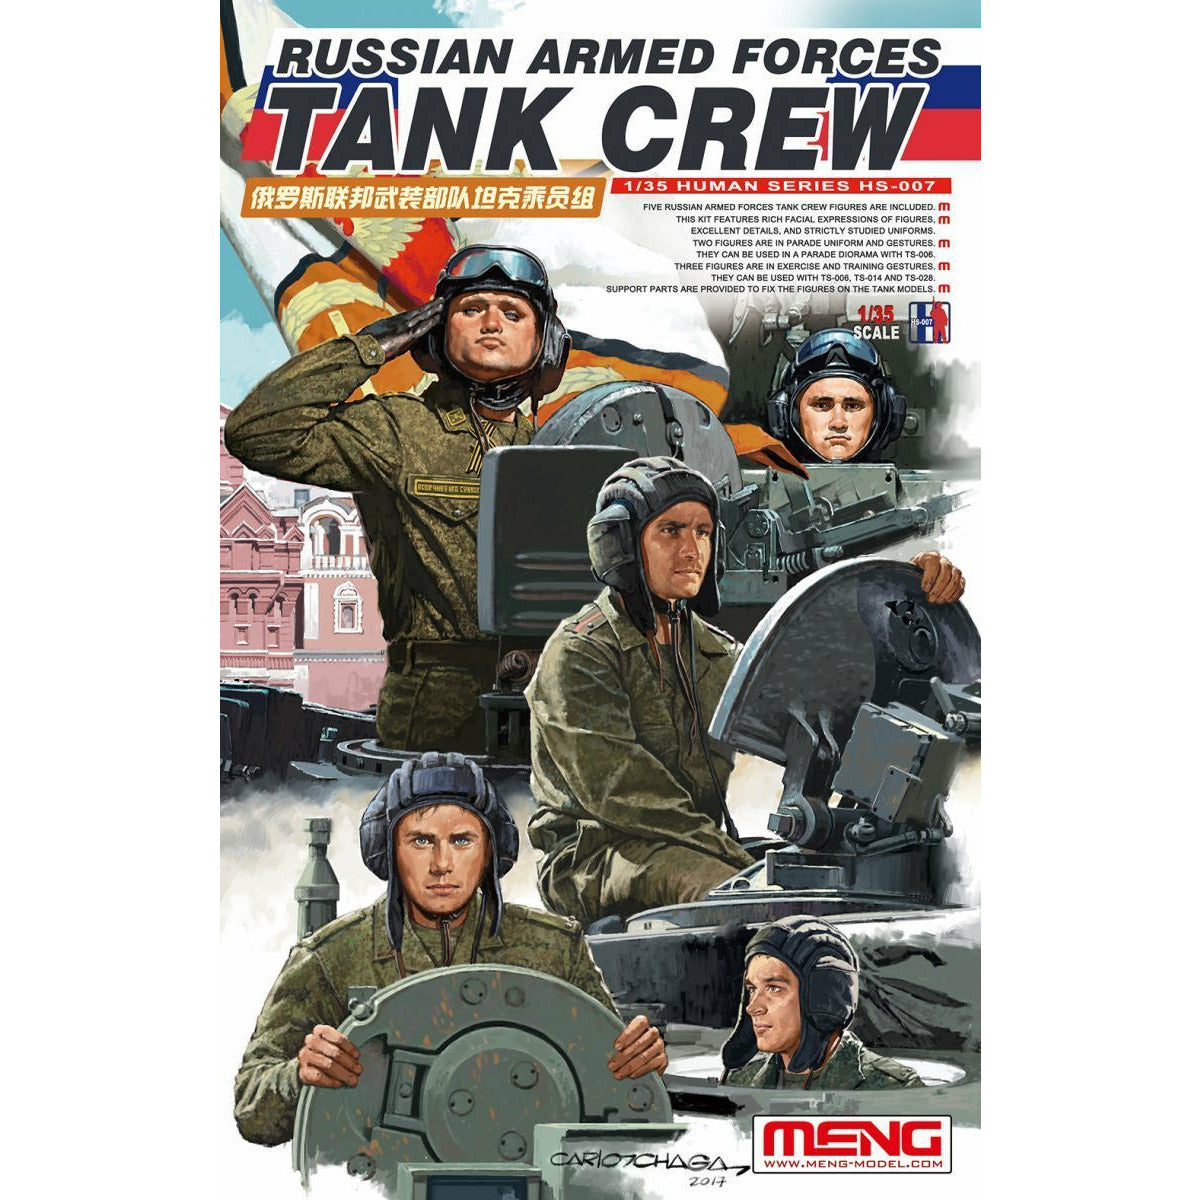 Russian Armed Forces Tank Crew HS-007 - 1/35 Human Series by Meng